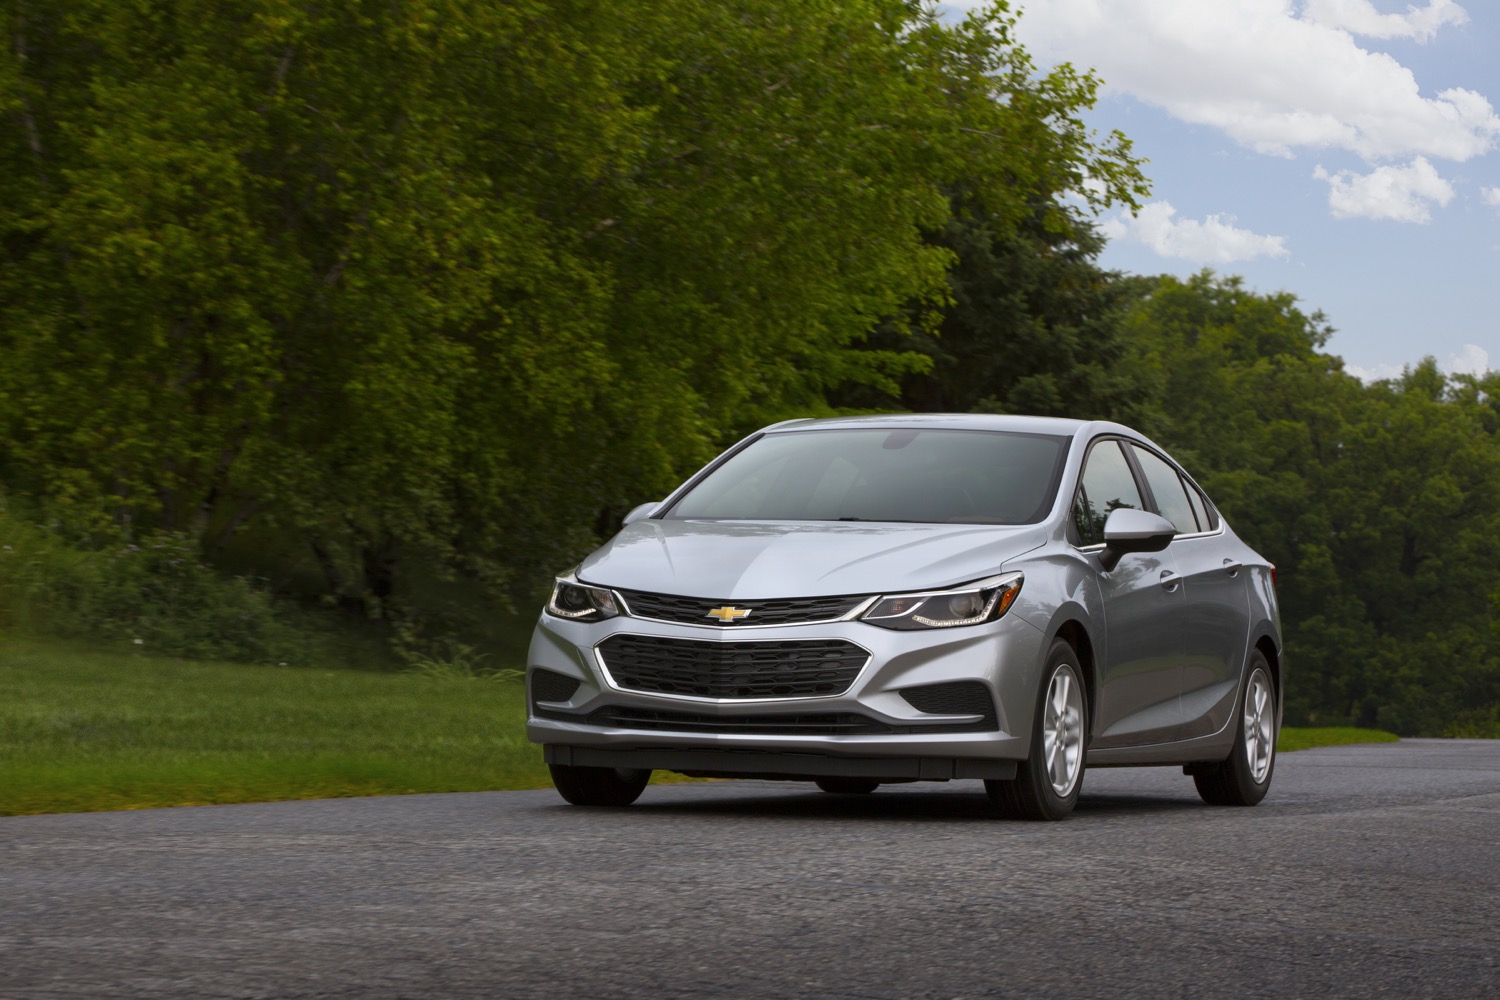 Chevy Cruze Diesel: REVIEW